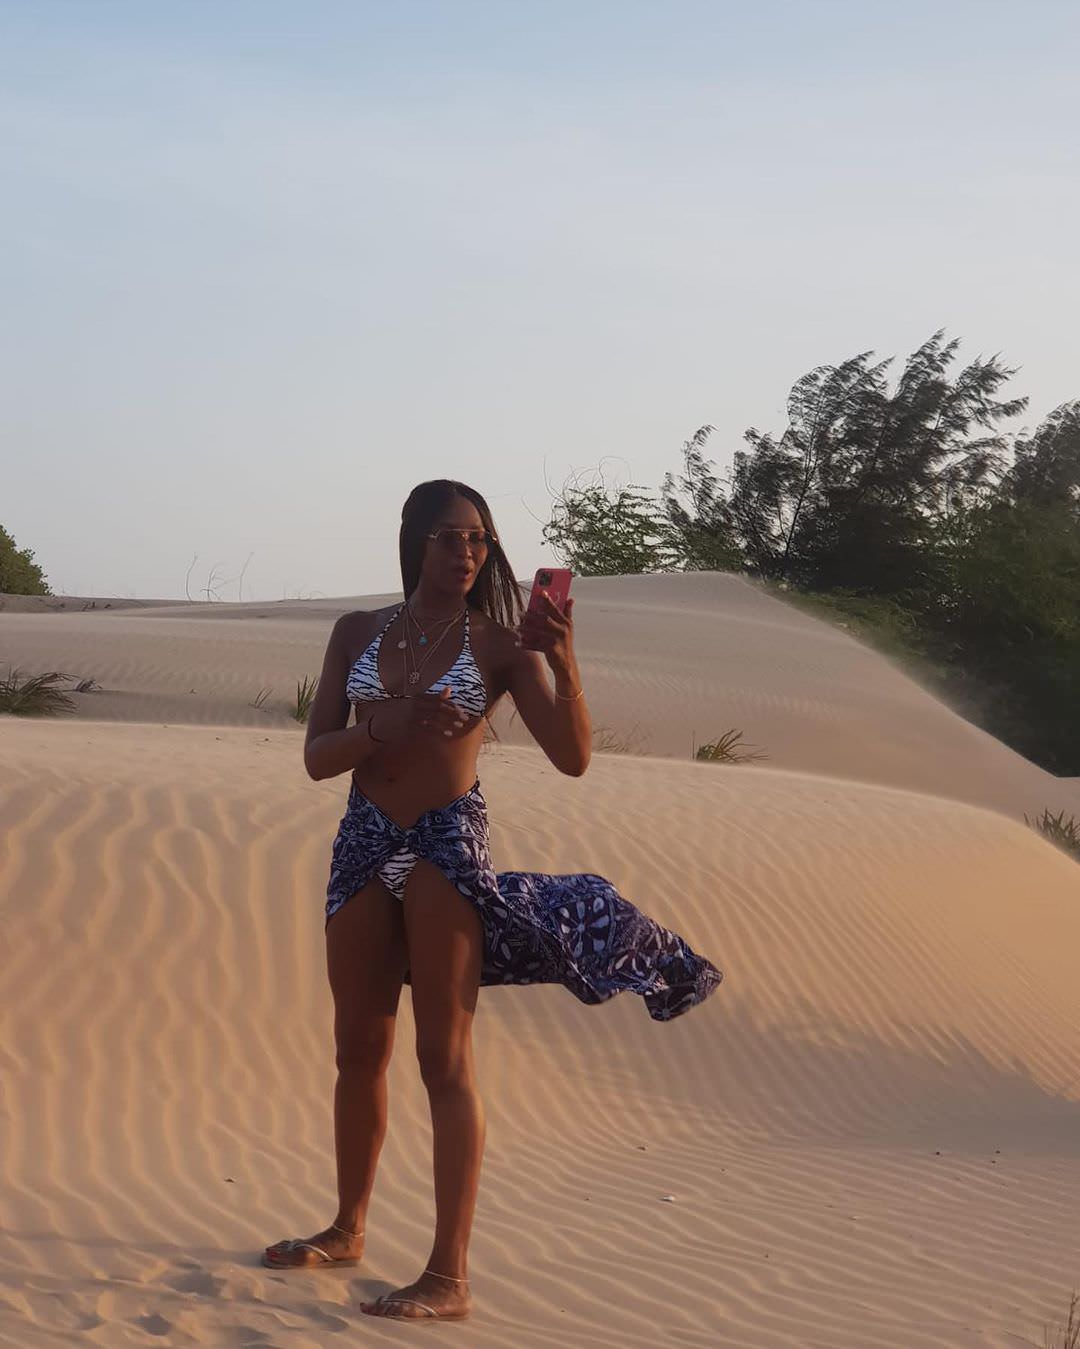 During her trip to Africa, the supermodel posed in the desert sand, dressed in Melissa Odabash's 